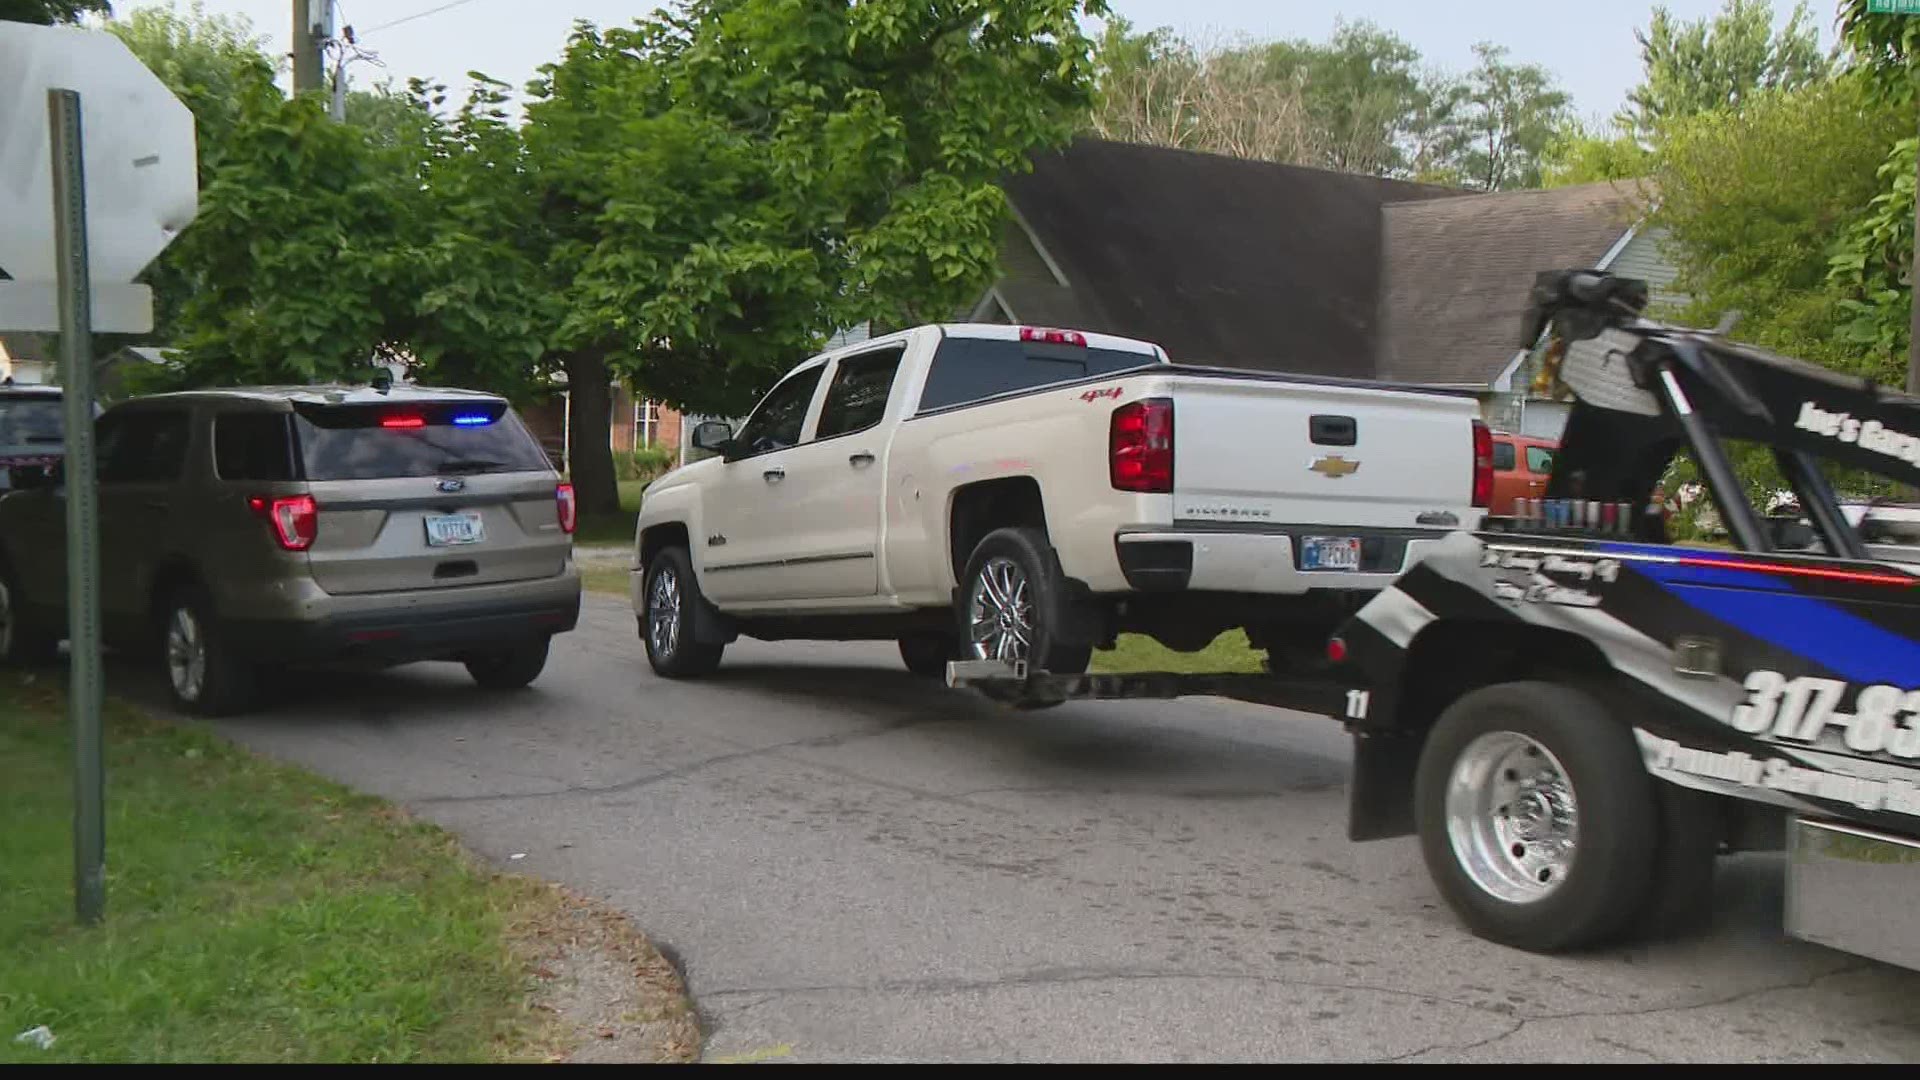 The truck was stolen from a Plainfield convenience store.